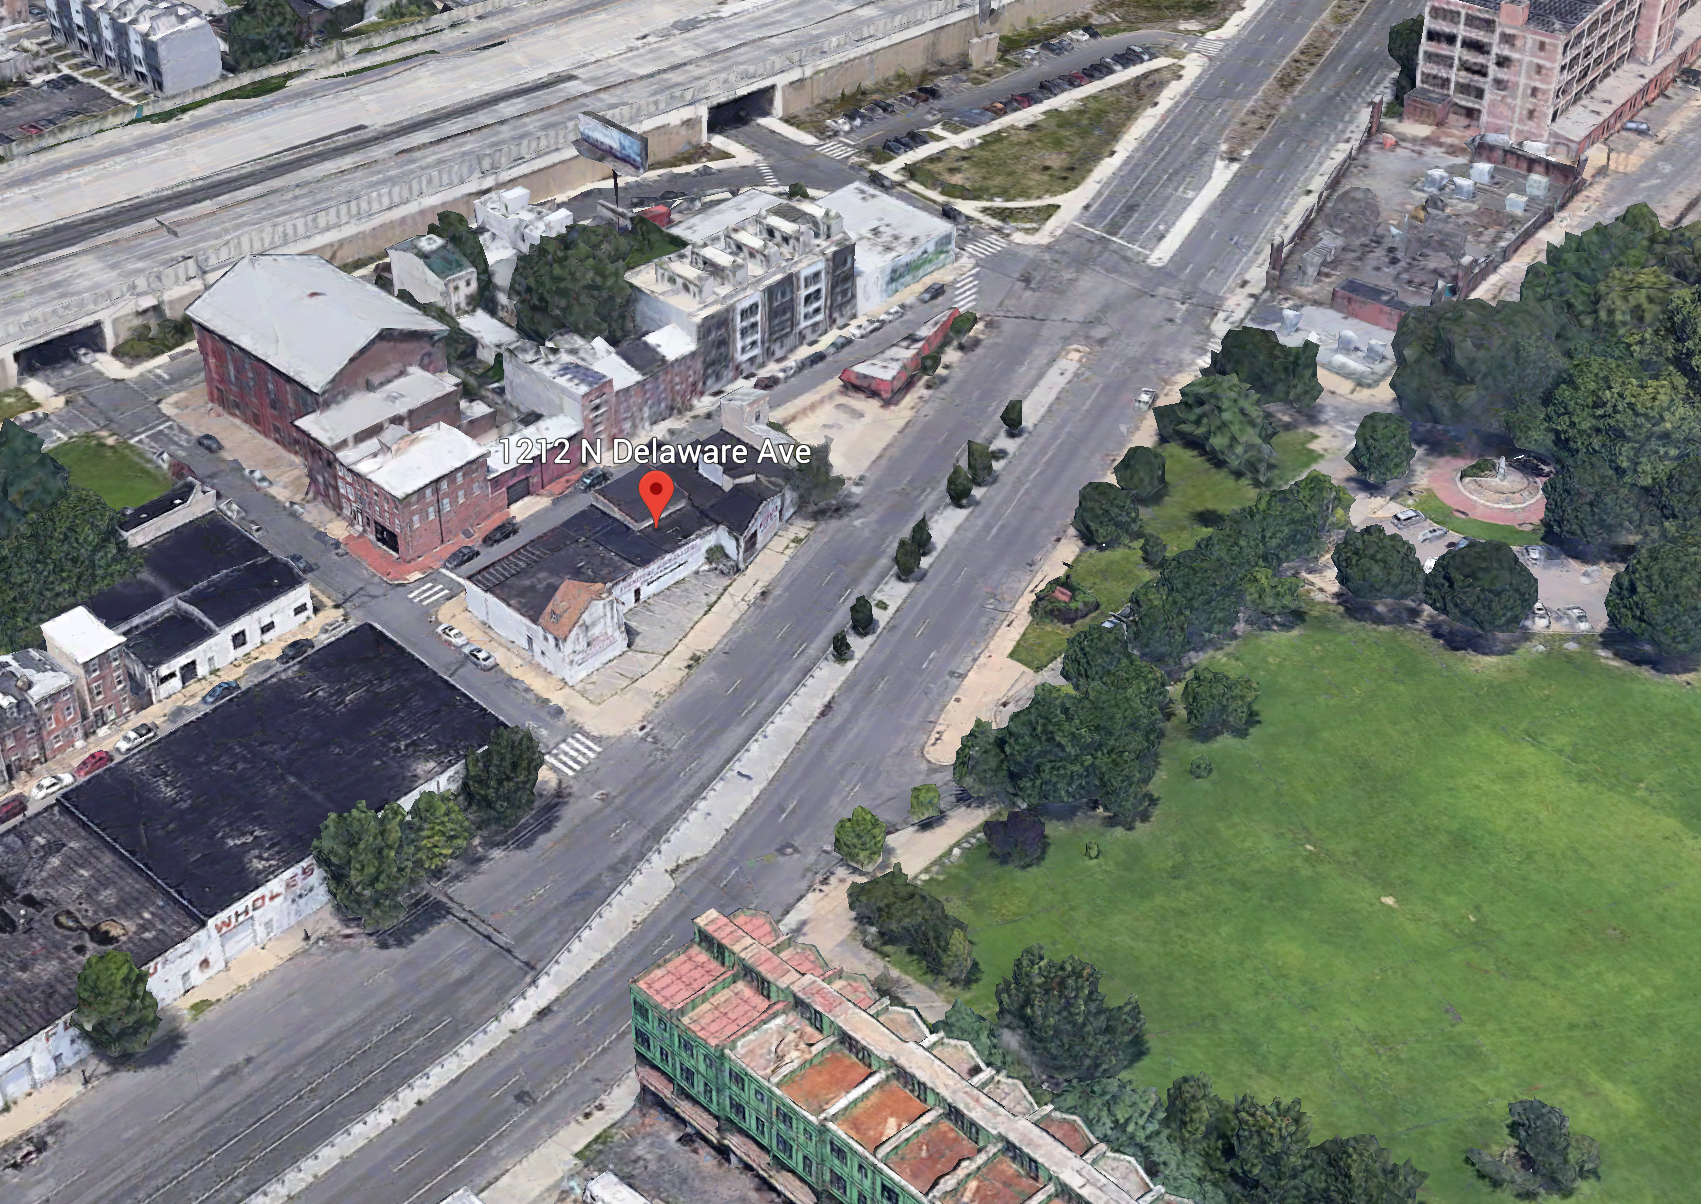 Current view of 1212-16 North Delaware Avenue. Credit: Google.